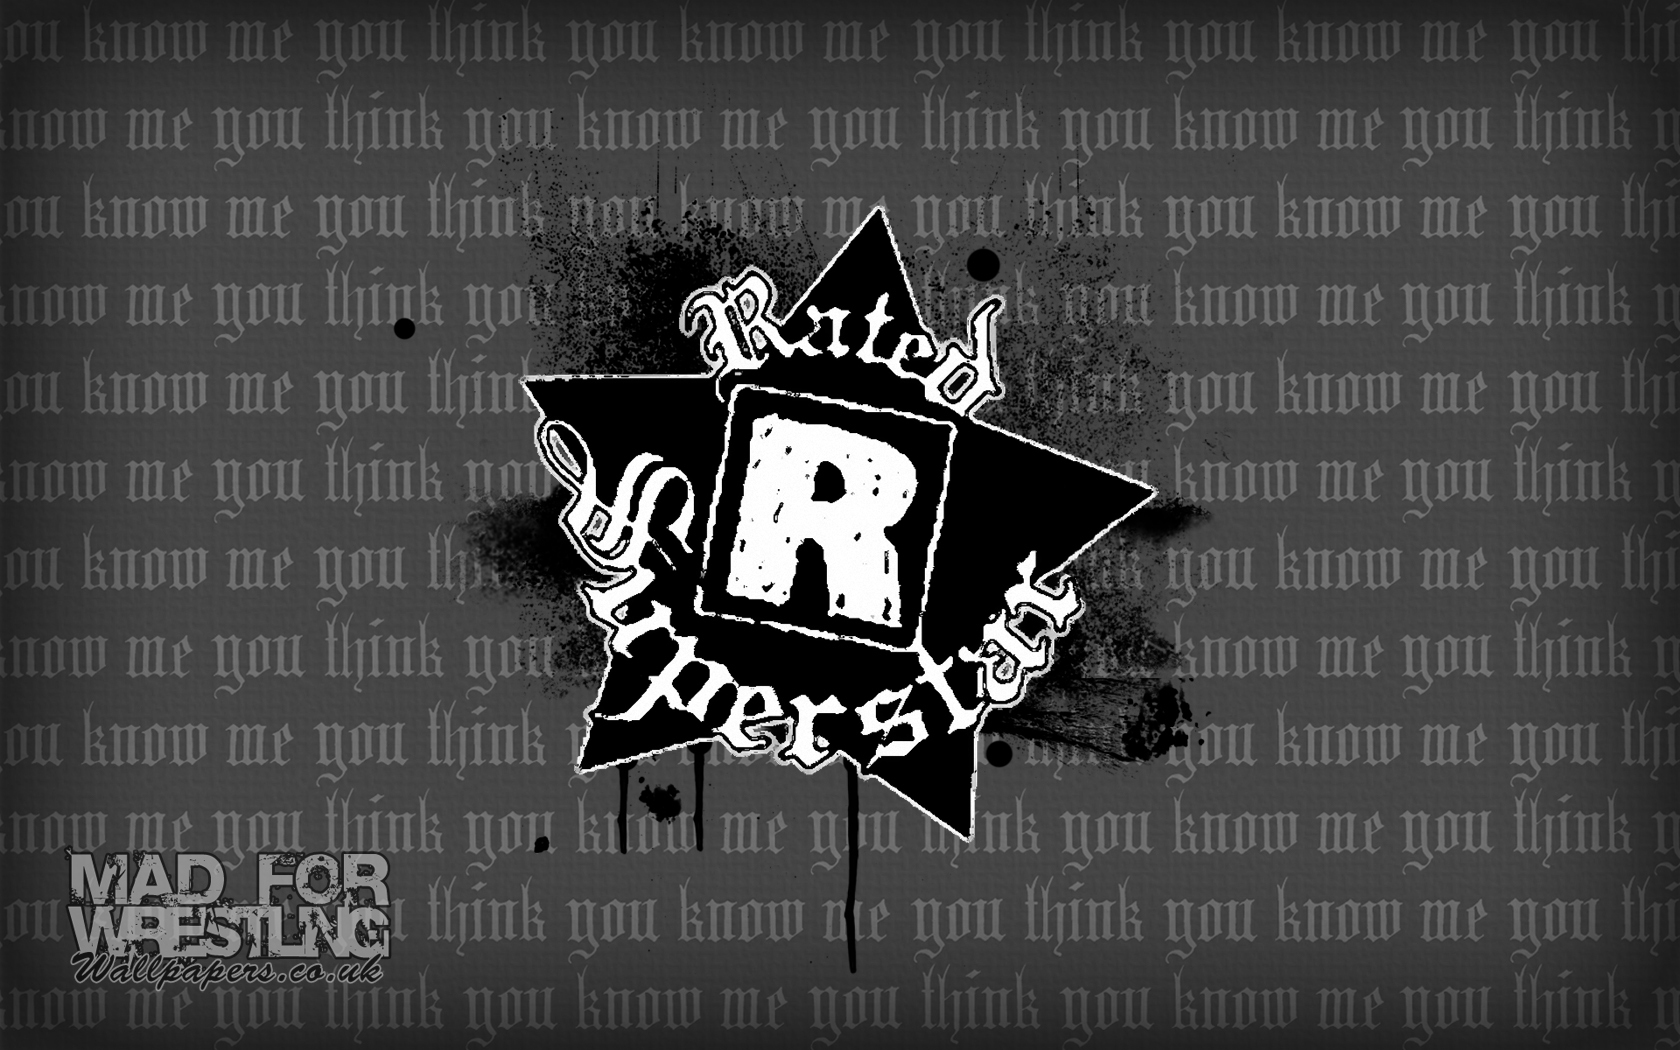 Rated R Superstar - Rated R Superstar Wallpaper Hd , HD Wallpaper & Backgrounds